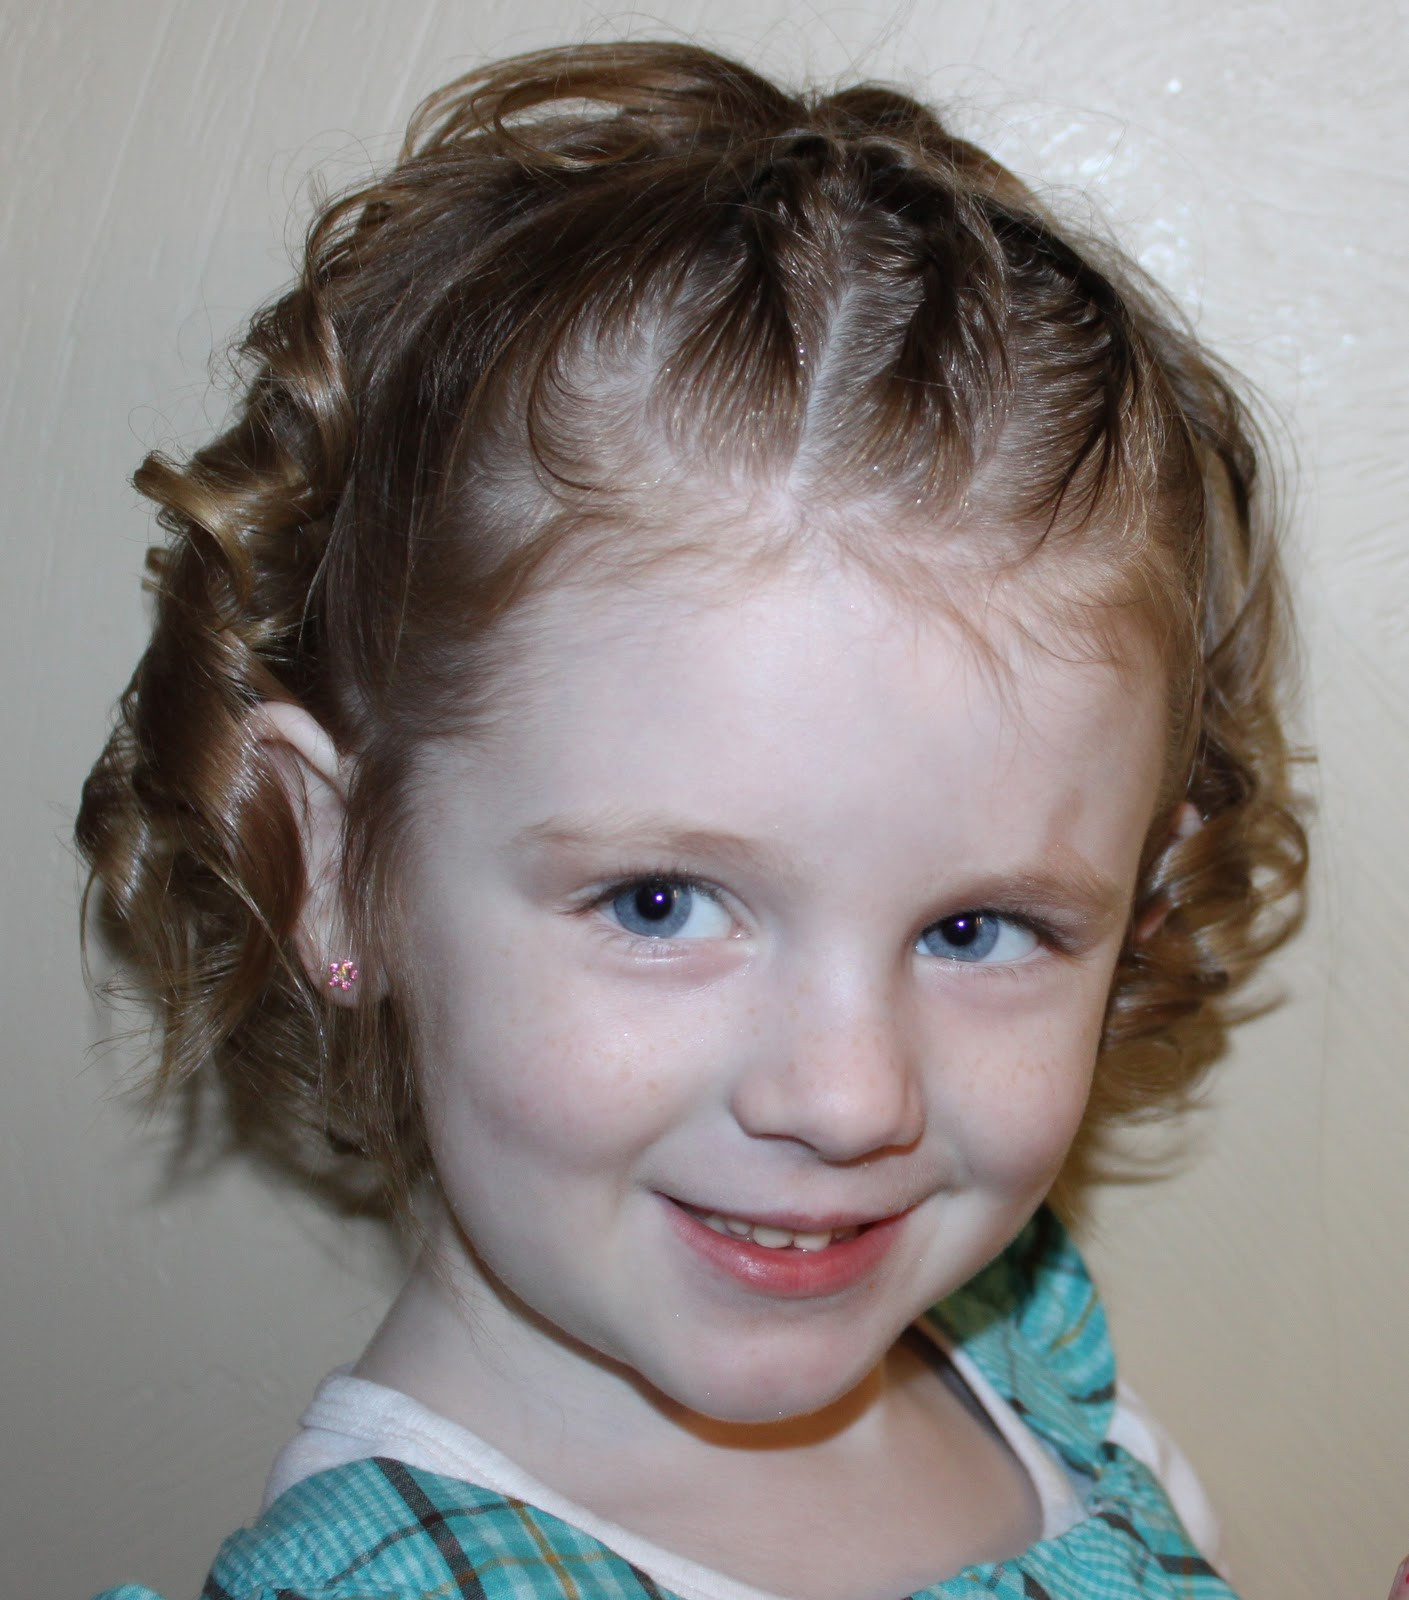 Toddler Hairstyles Girls
 Hairstyles for Girls The Wright Hair Toddler 3 rolls to